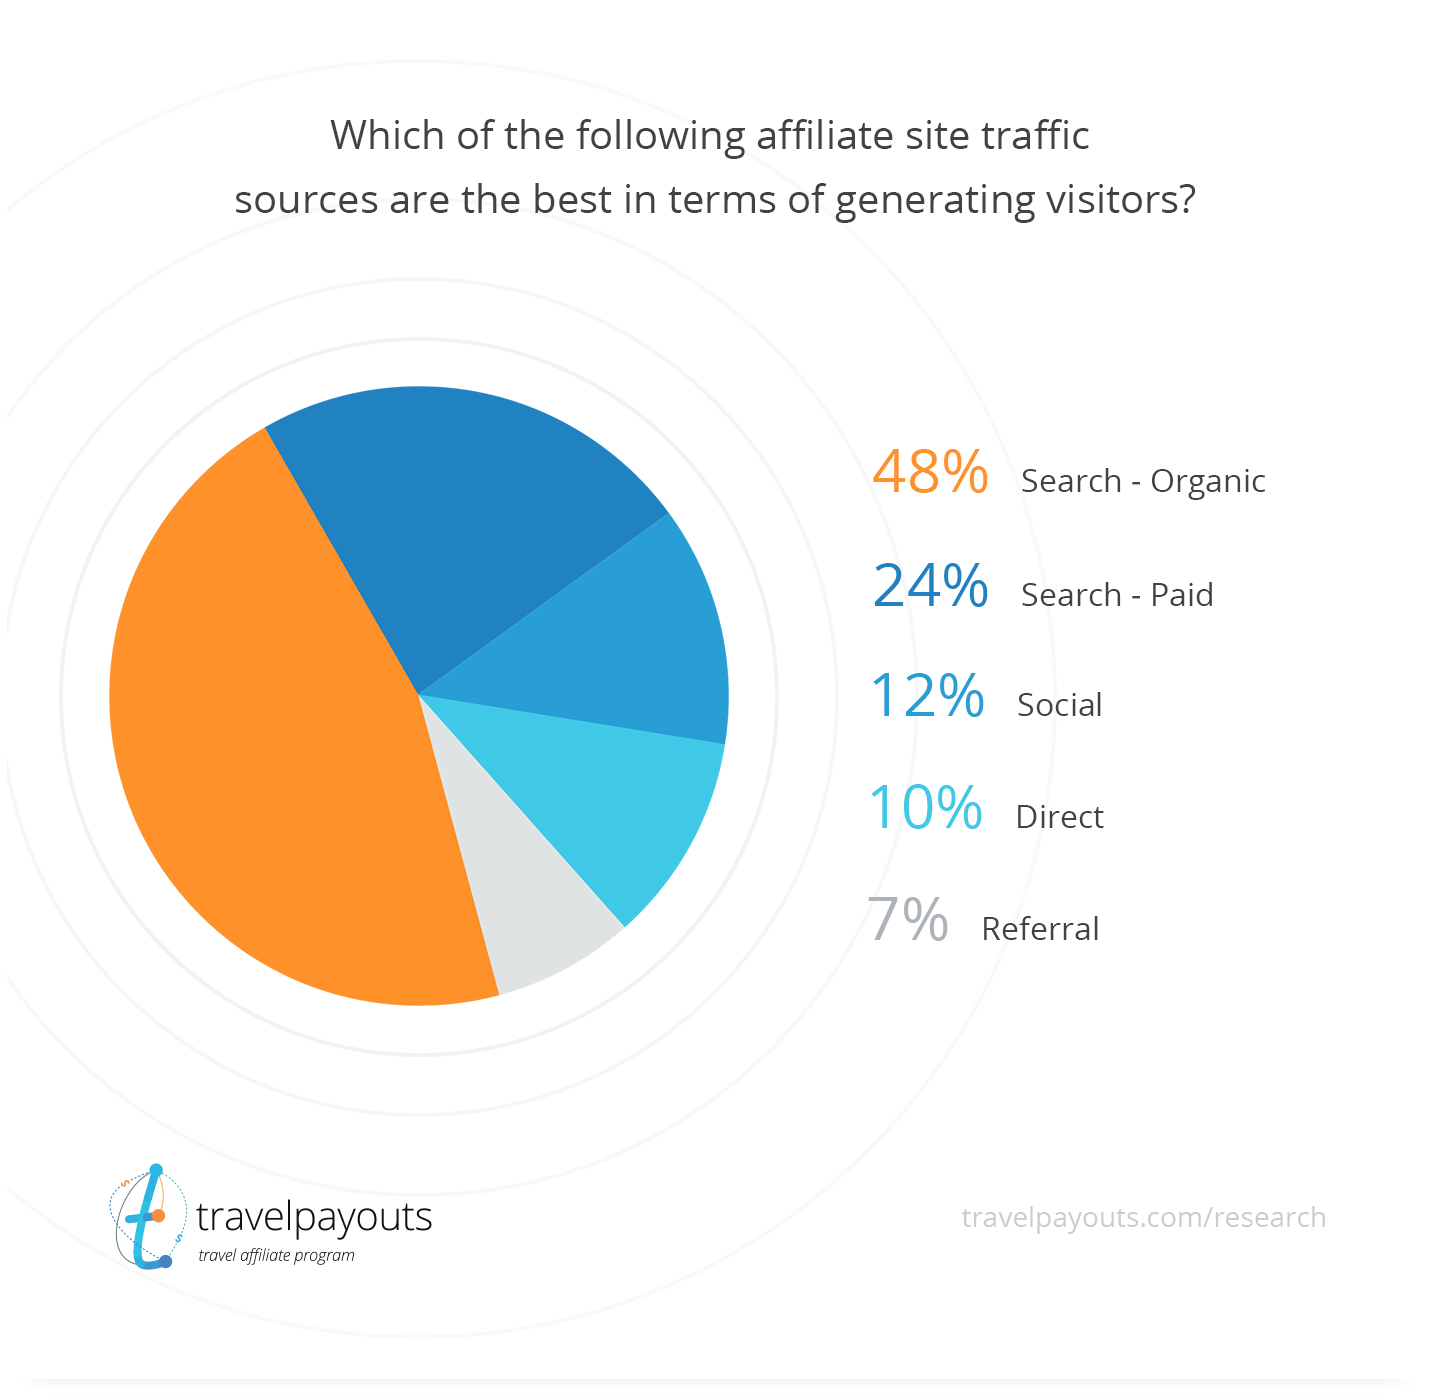 the best traffic sources for affiliate site visitors